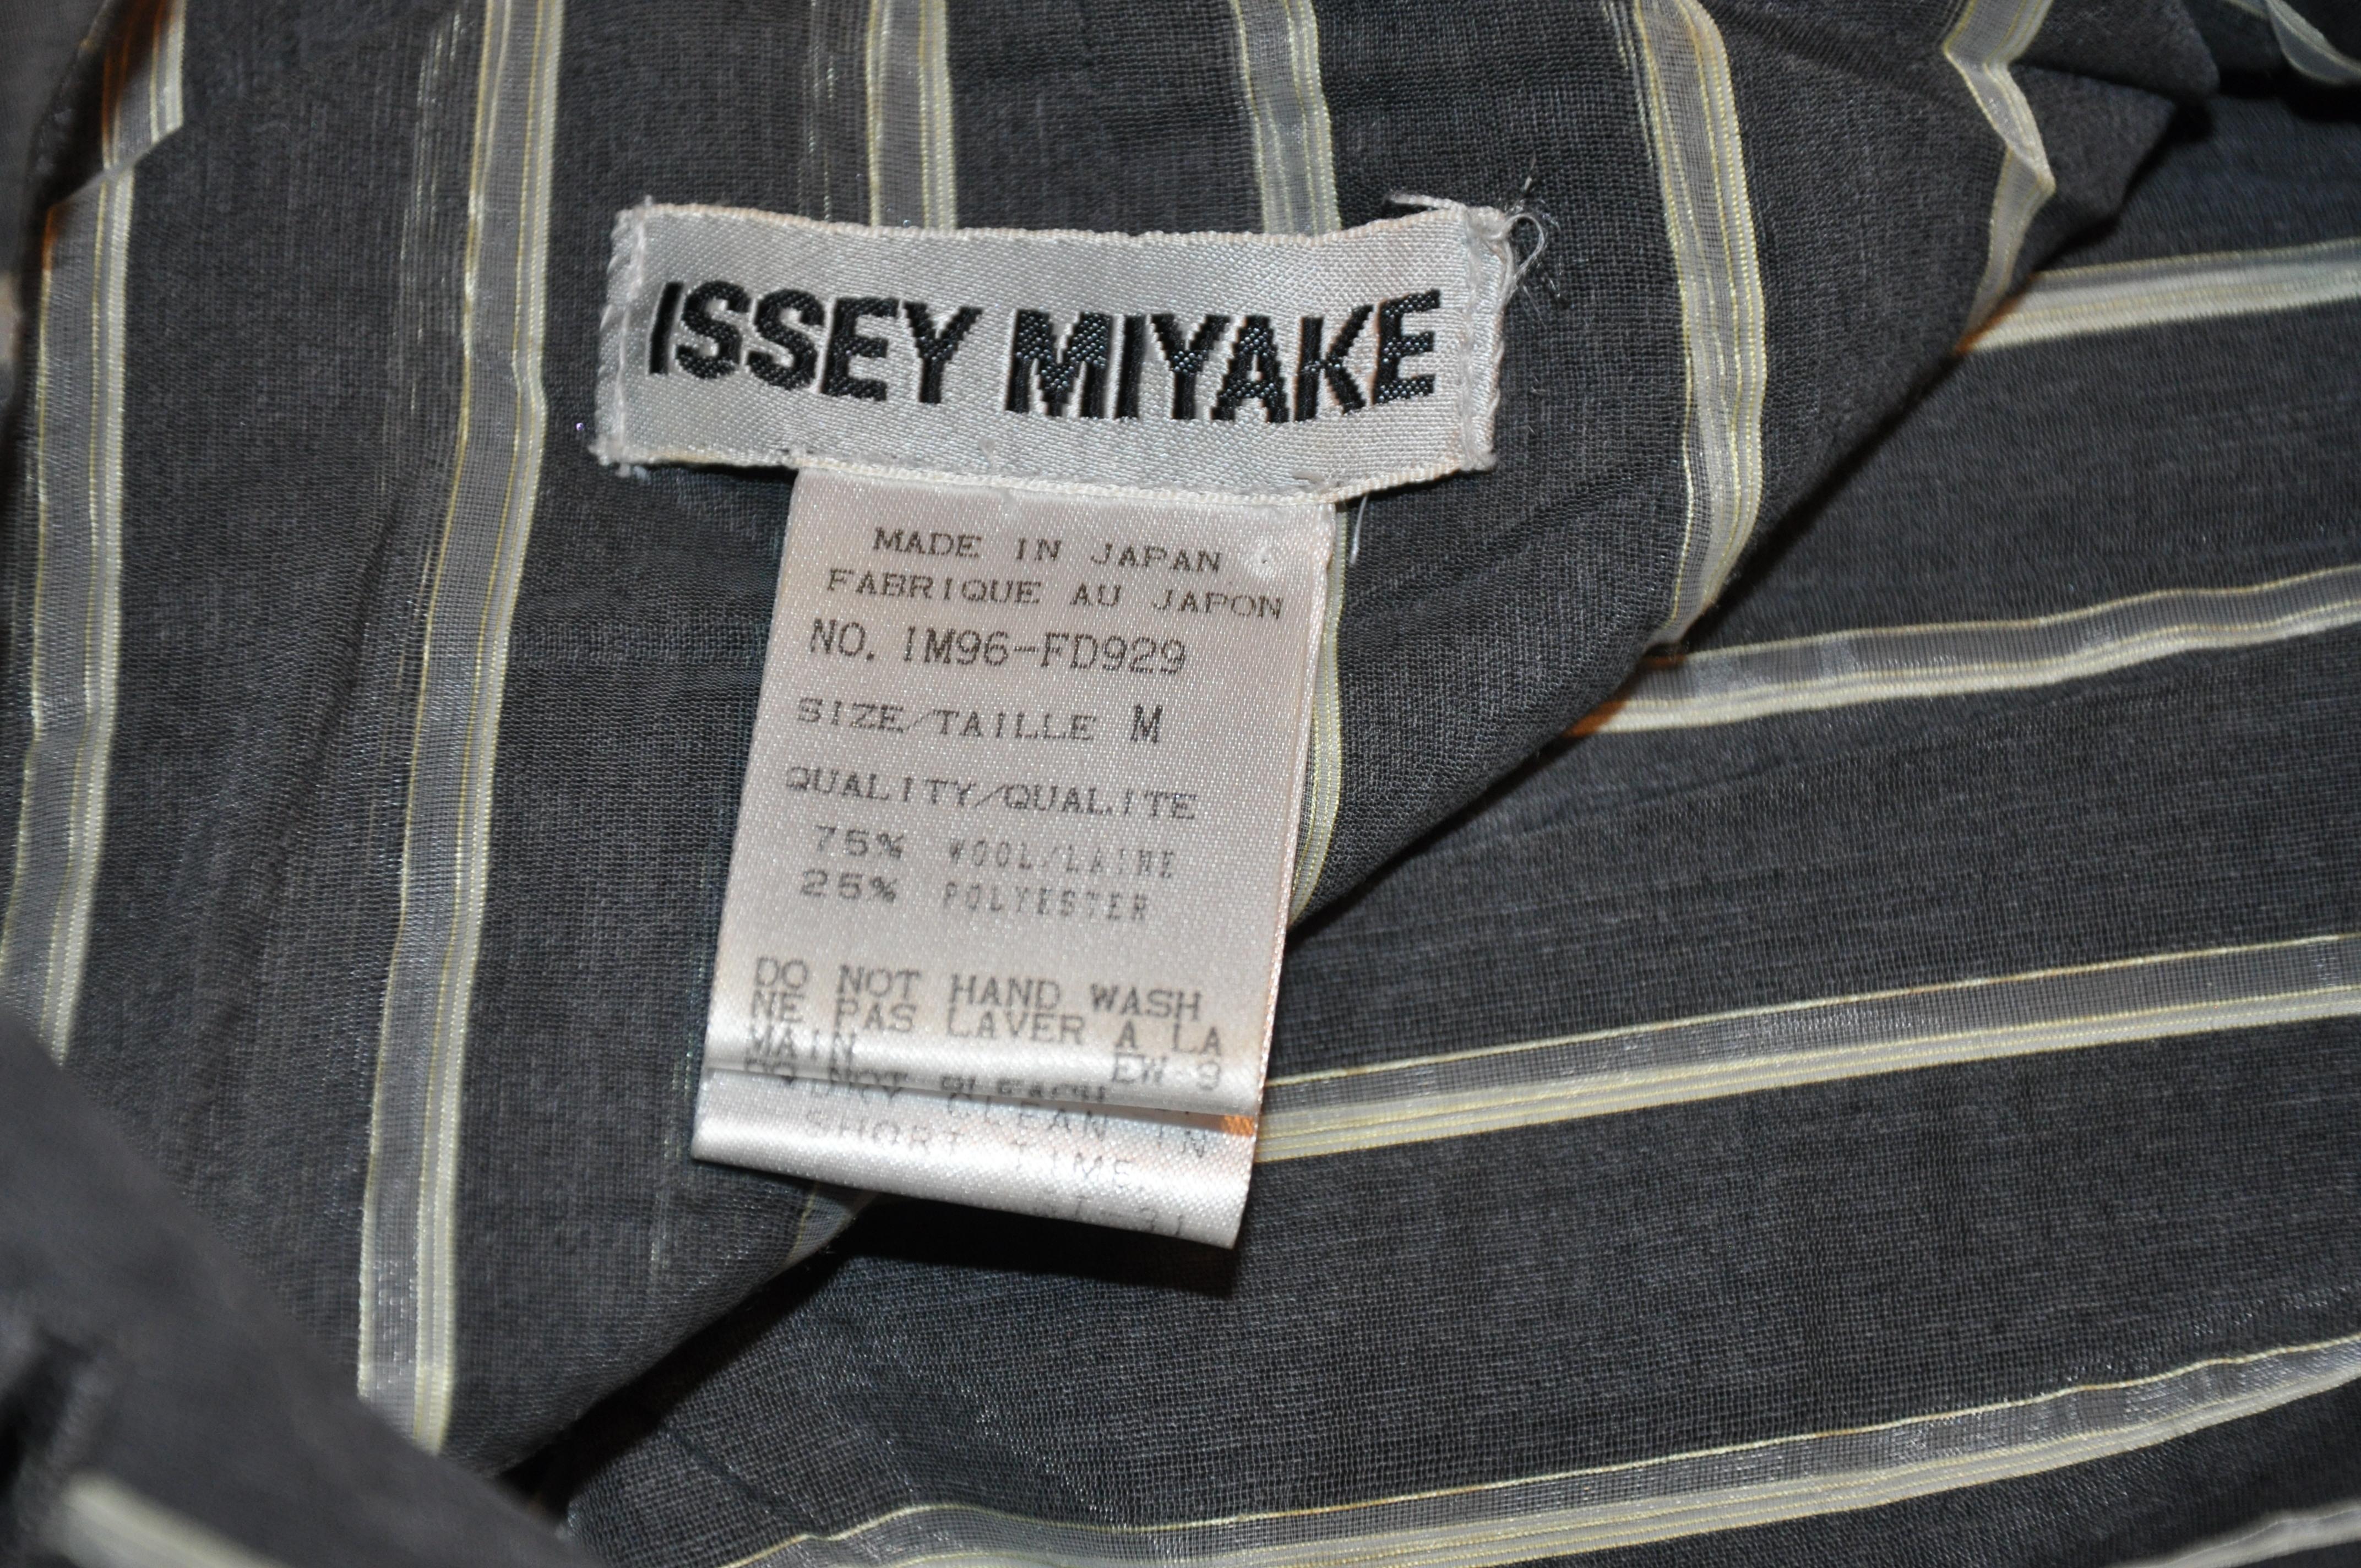 Issey Miyake wonderful sheer steel-gray linen-like painter's coat is actually a wool blend of 75% wool and 25% Polyester. Yet the feel and appearance is Linen-like. The 6-button front is accented with three patch pockets with a single-button closing